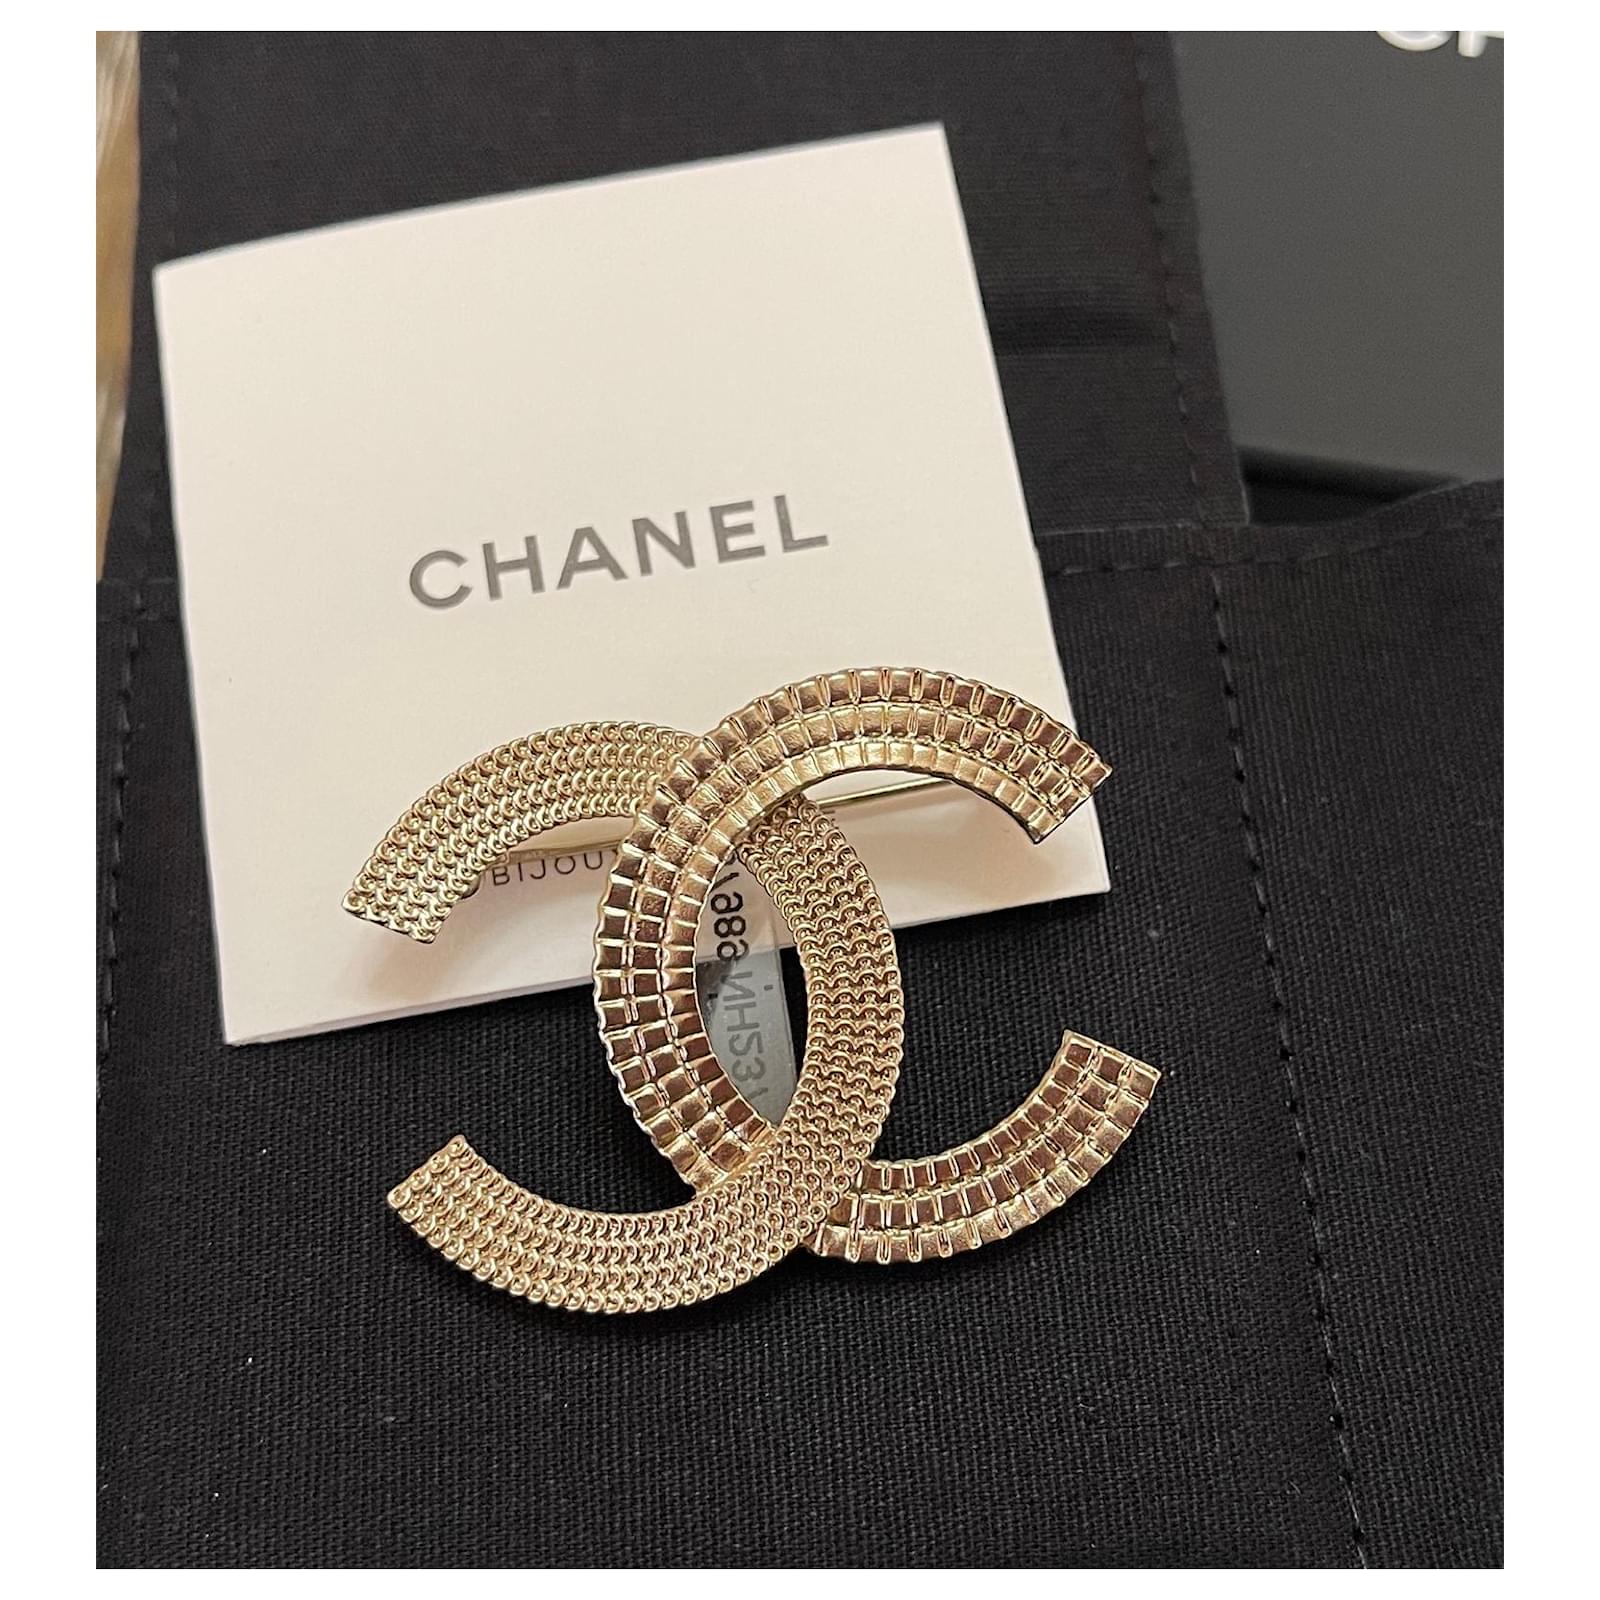 Vintage CHANEL golden turn lock CC pin brooch with crystals. Very classic  and popular jewelry. Coco mark brooch. 0411251